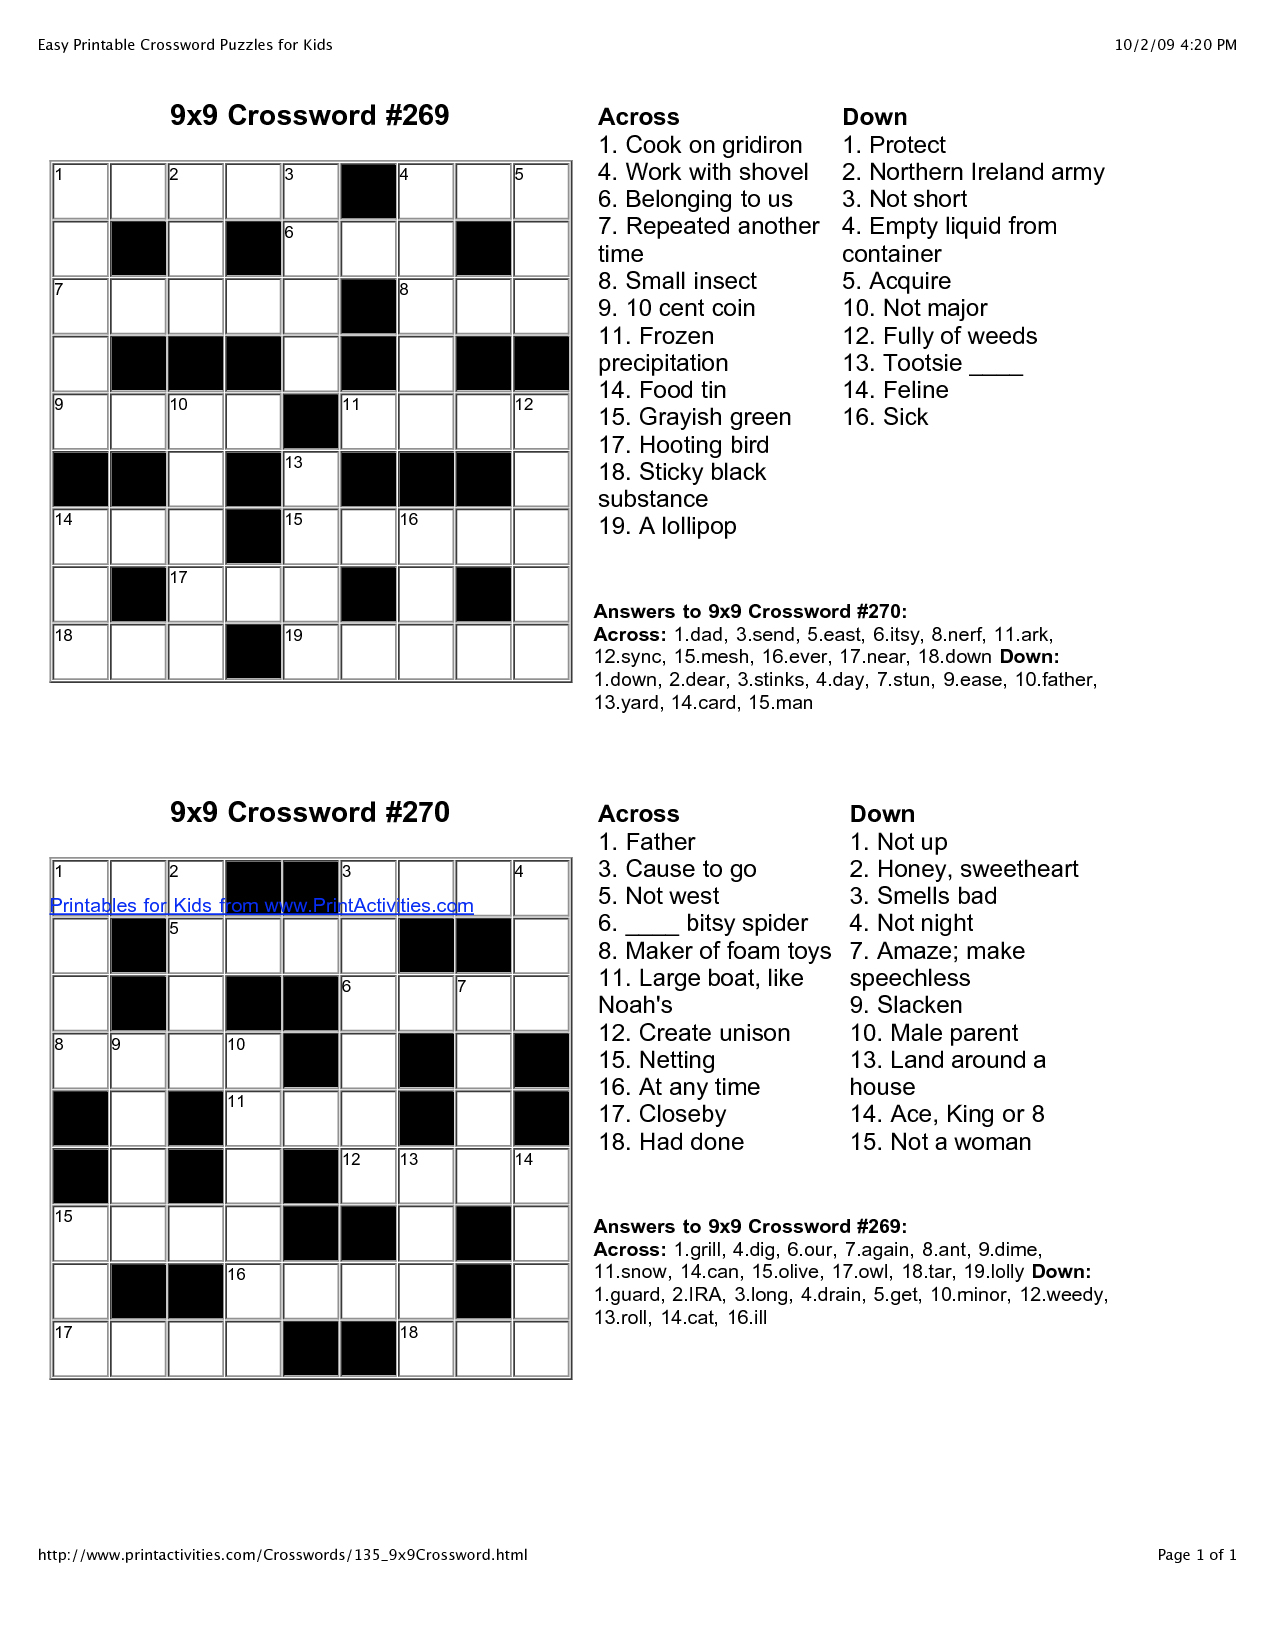 Easy Printable Crossword Puzzles For Kid - Printable Aarp Crossword Puzzles